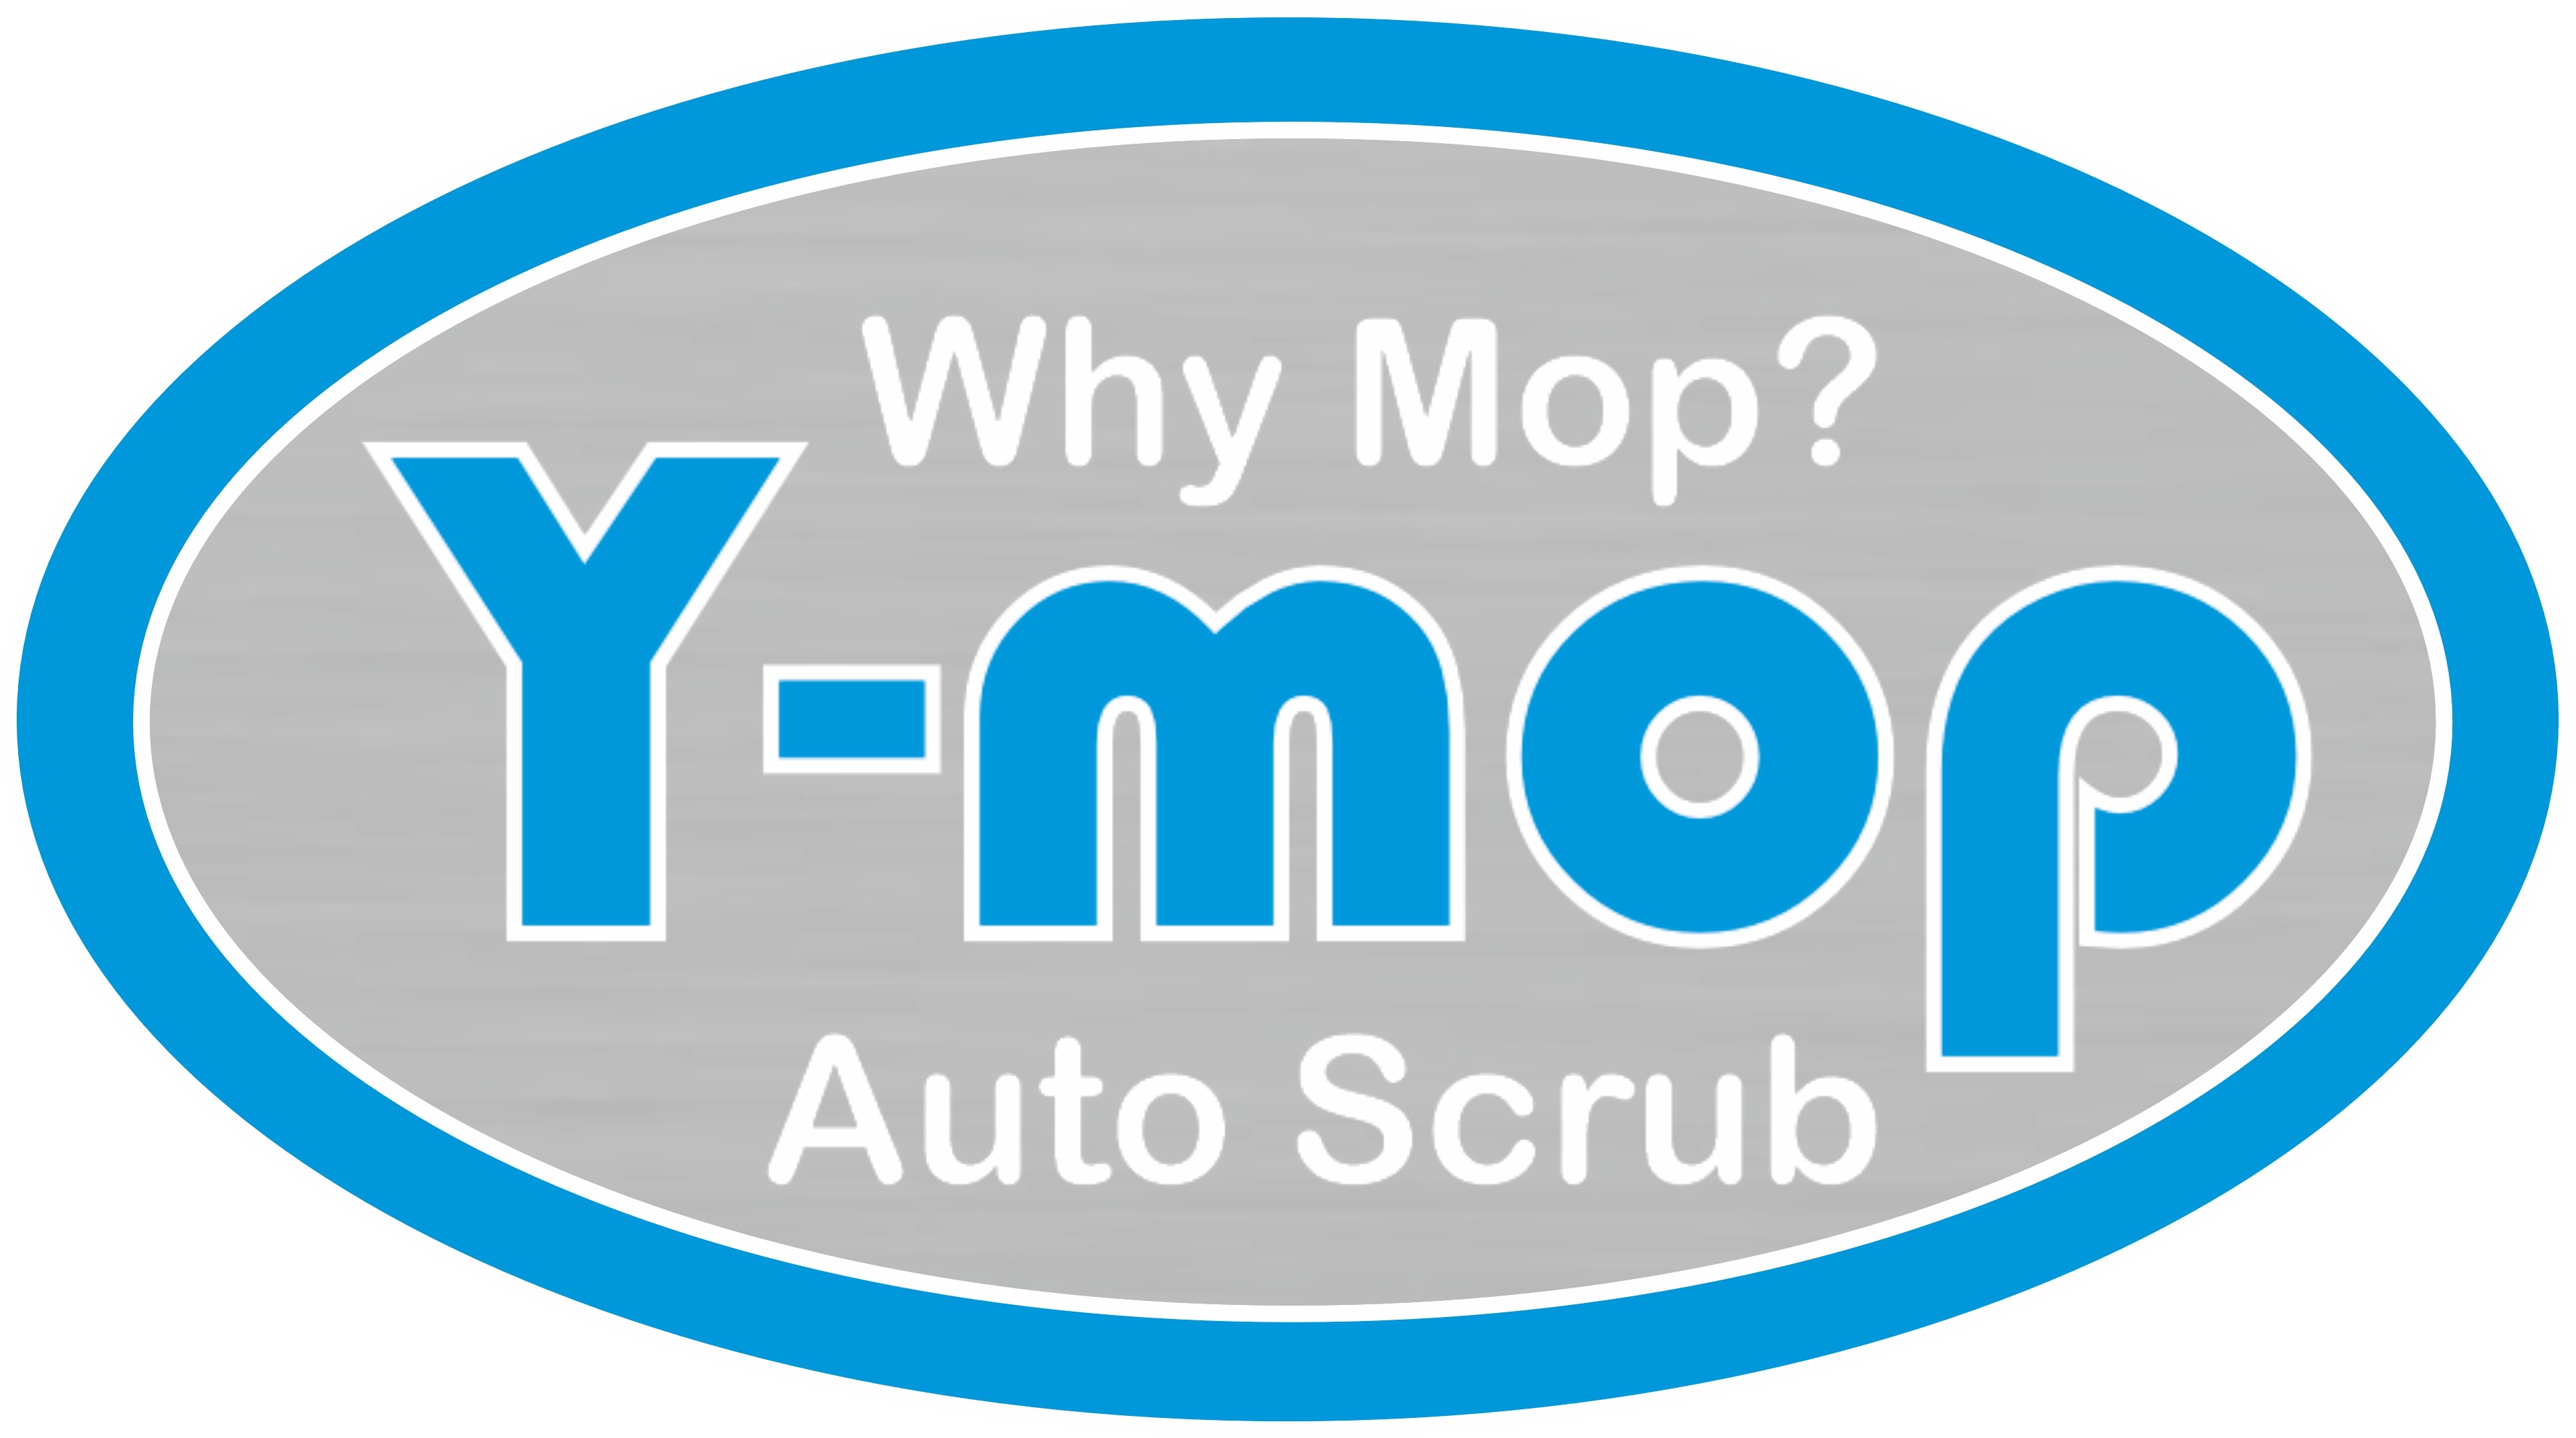 Forget i-mop when you can Y-mop. Why Mop when you can Auto Scrub